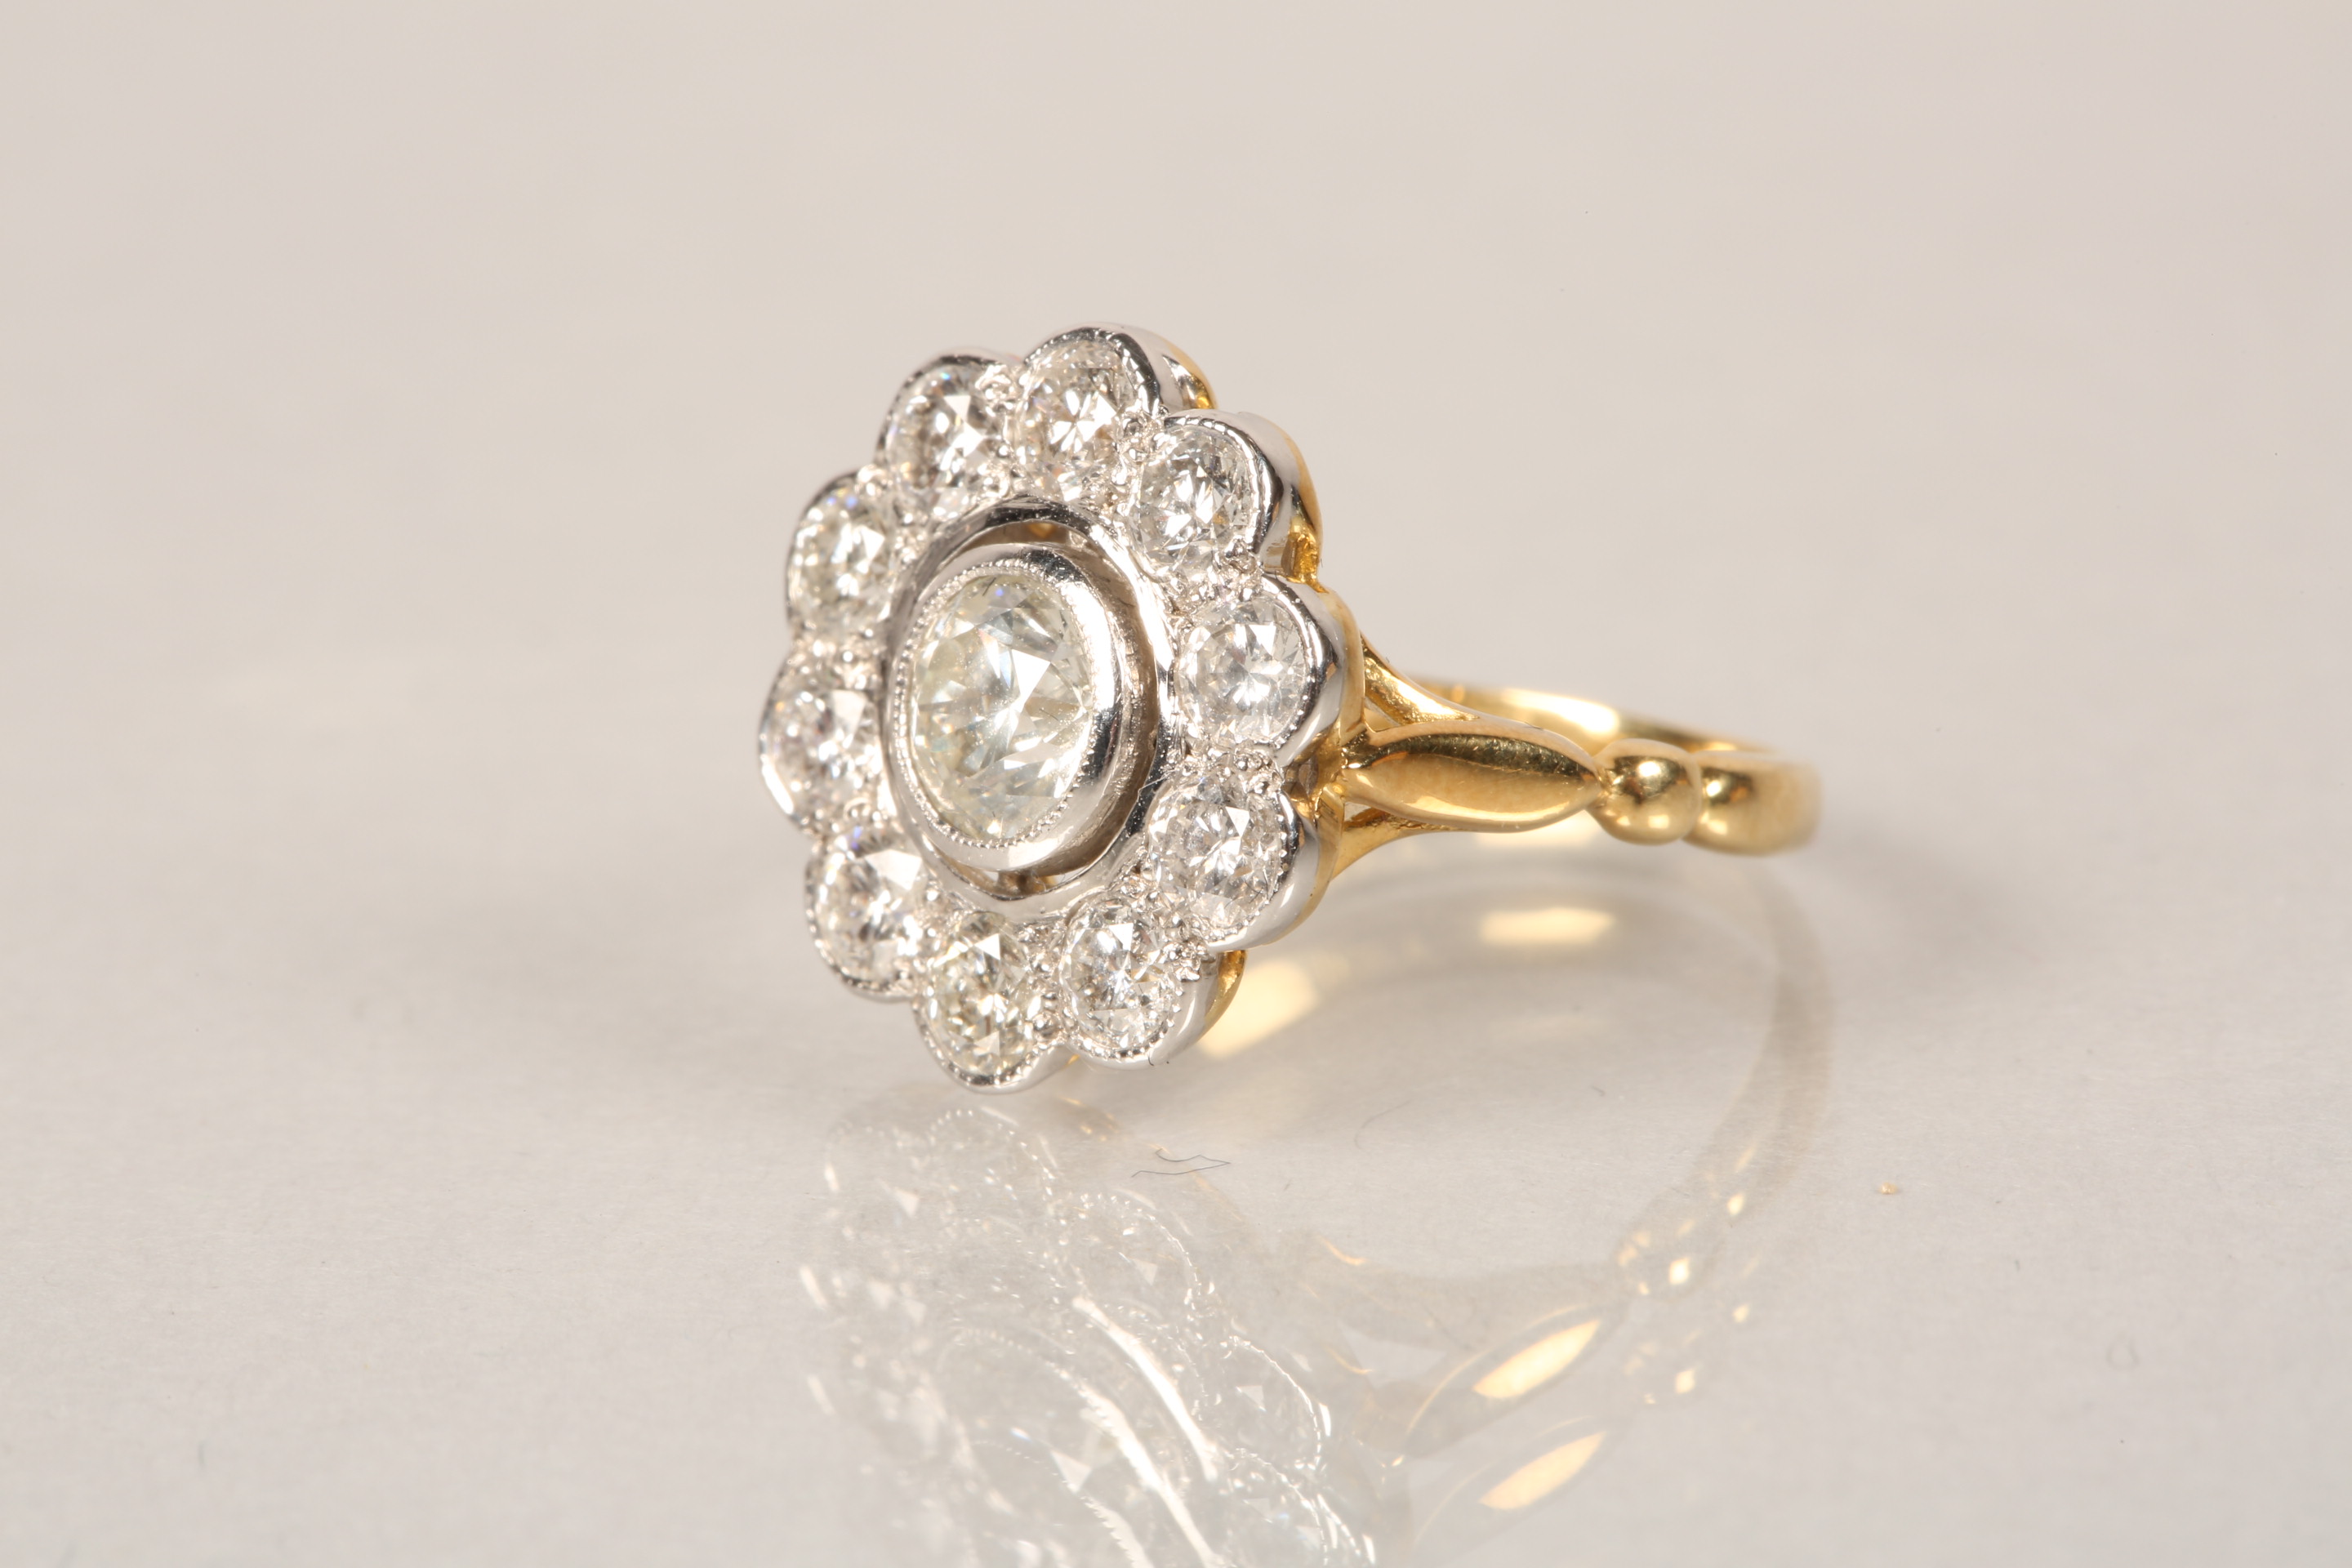 18 carat gold diamond cluster ring, daisy form, centre stone approx. 0.75 carat brilliant cut - Image 3 of 5